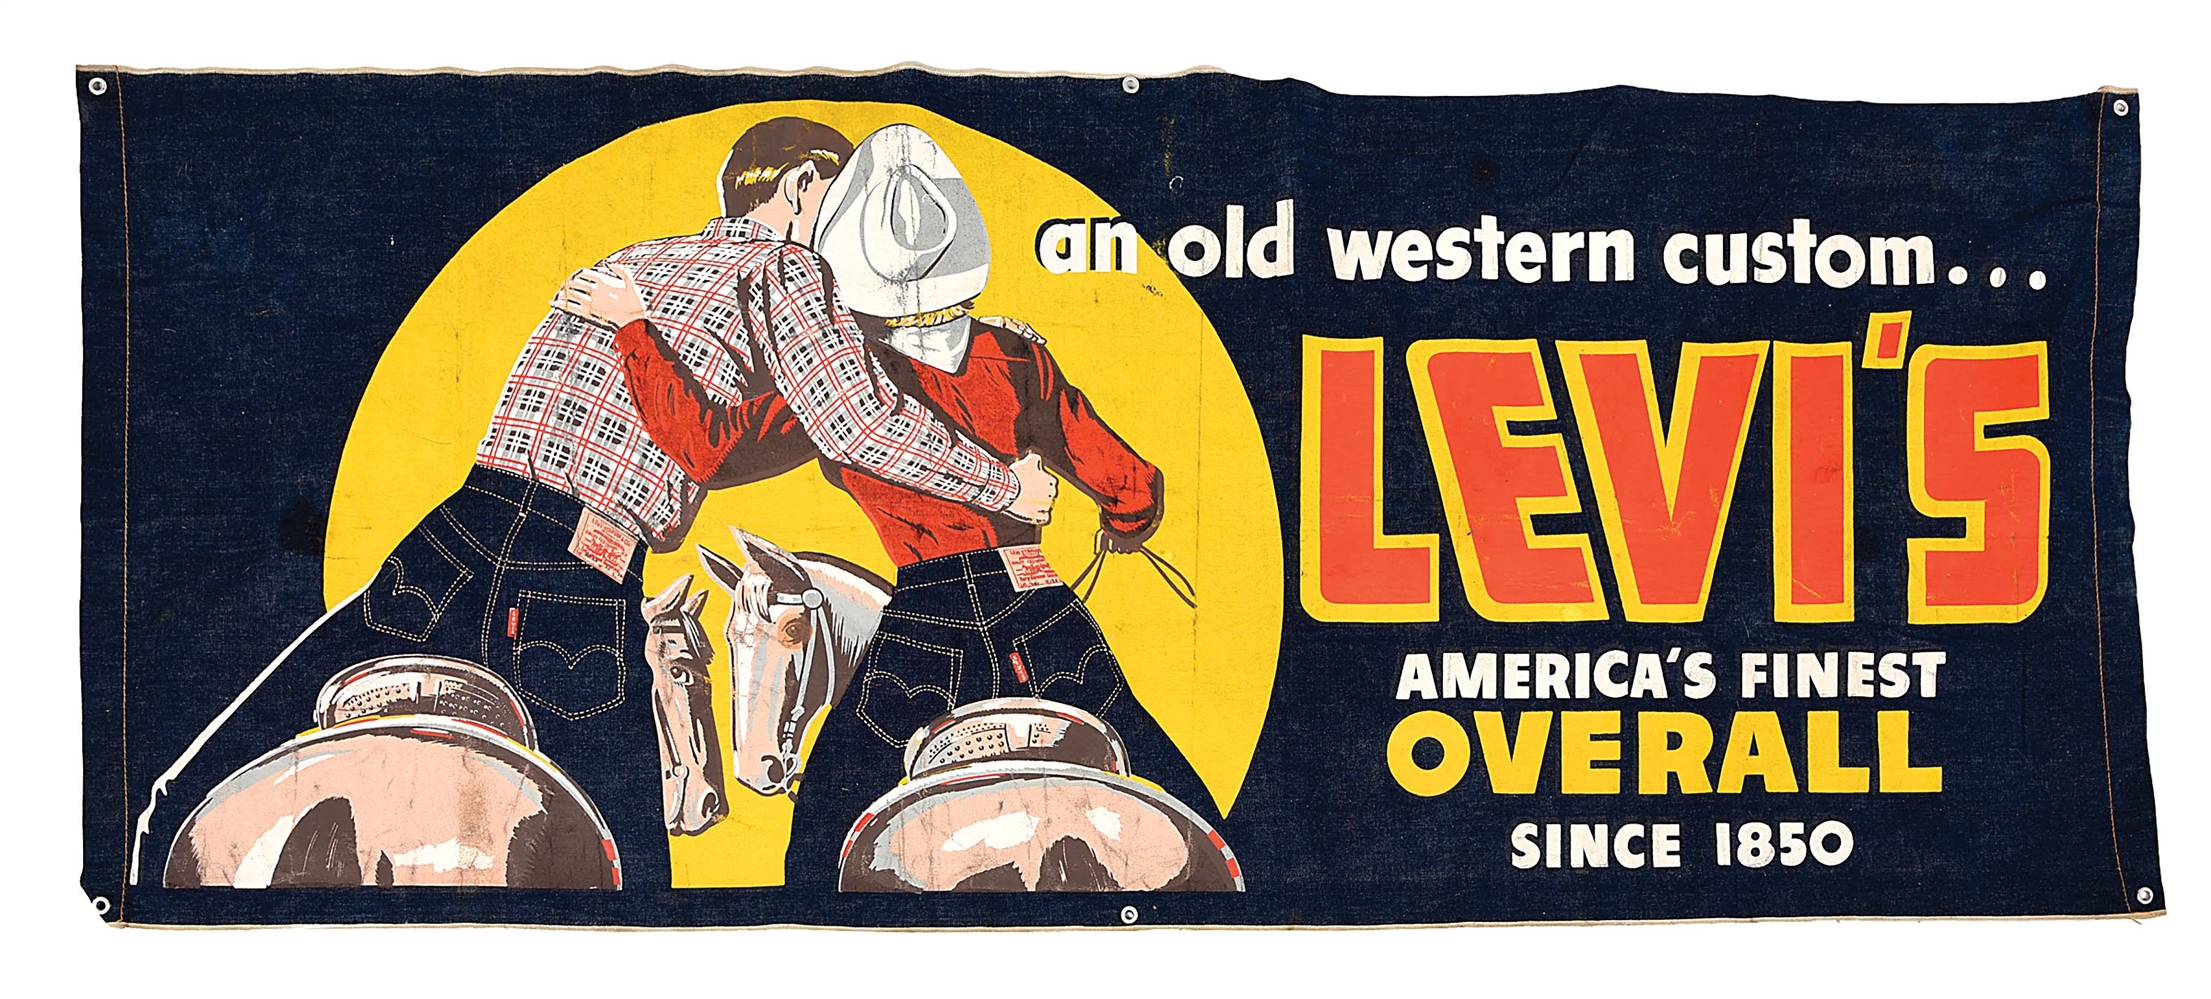 LEVIS COWBOY AND COWGIRL DENIM ADVERTISING BANNER